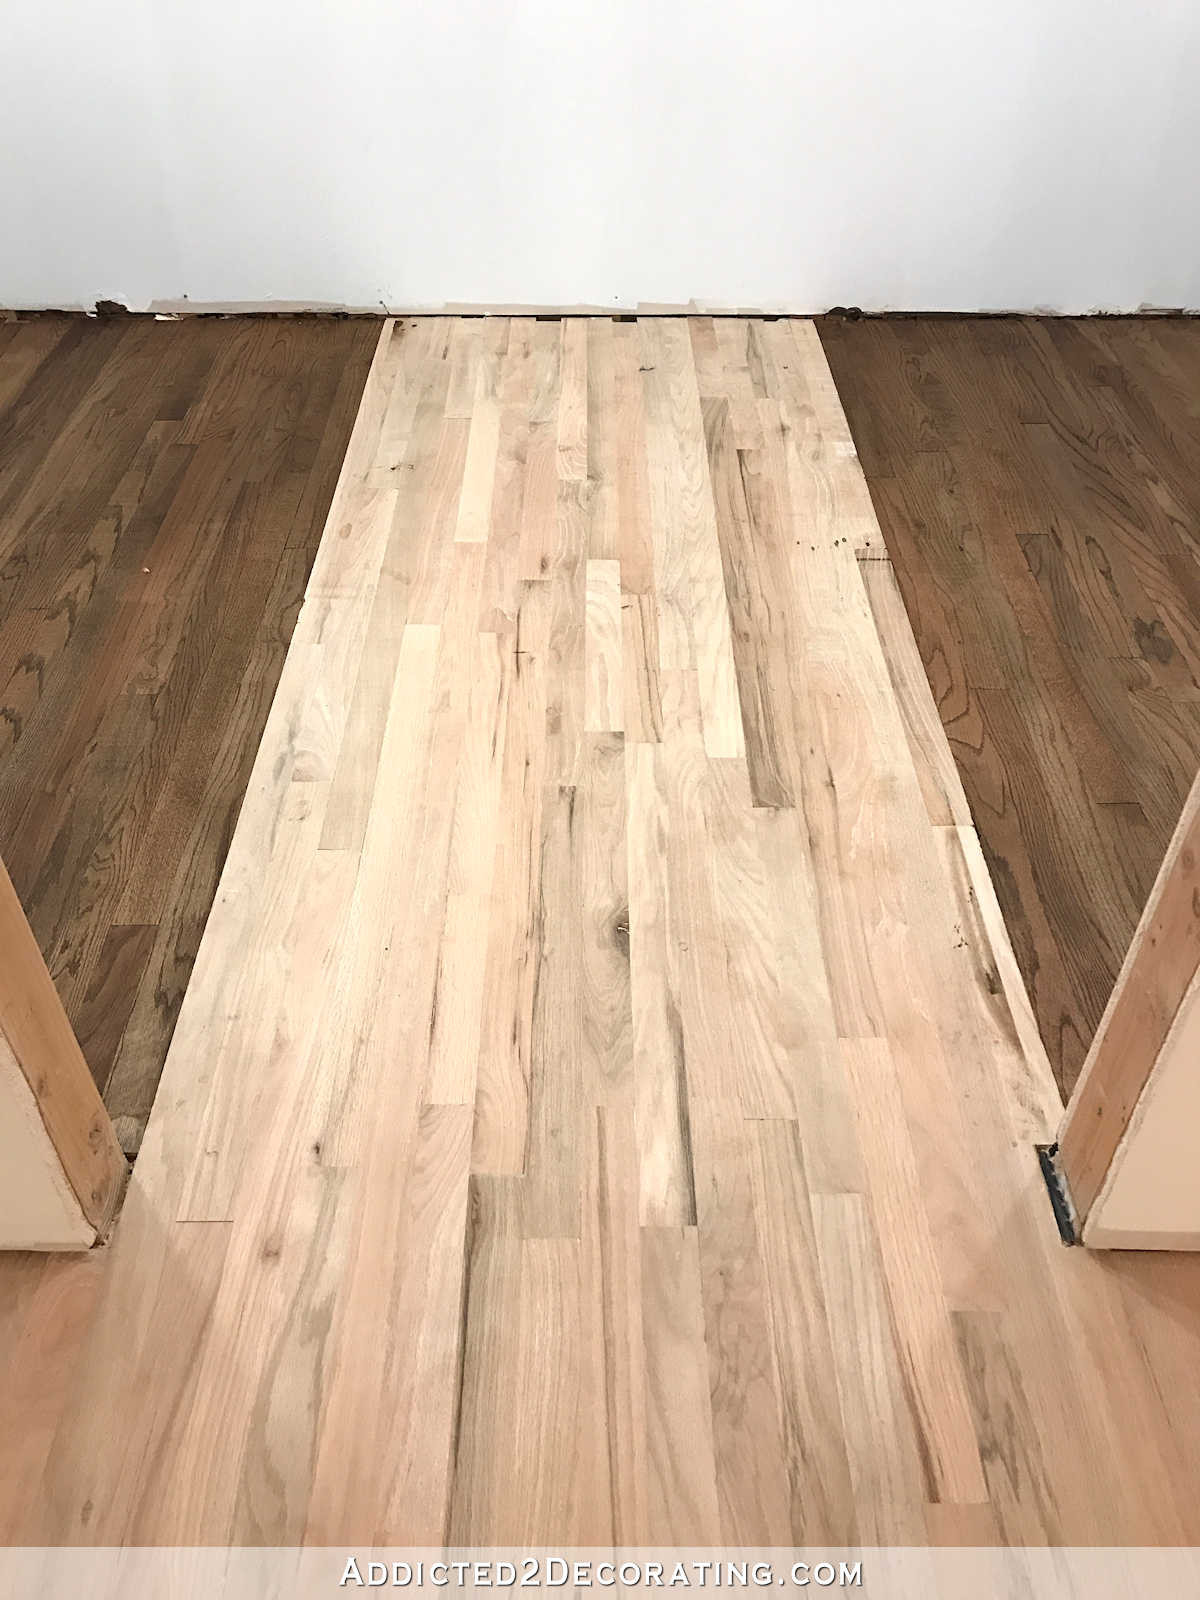 15 Awesome Staining Hardwood Floors Yourself 2024 free download staining hardwood floors yourself of adventures in staining my red oak hardwood floors products process intended for staining red oak hardwood floors 11 stain on left and right sides of the